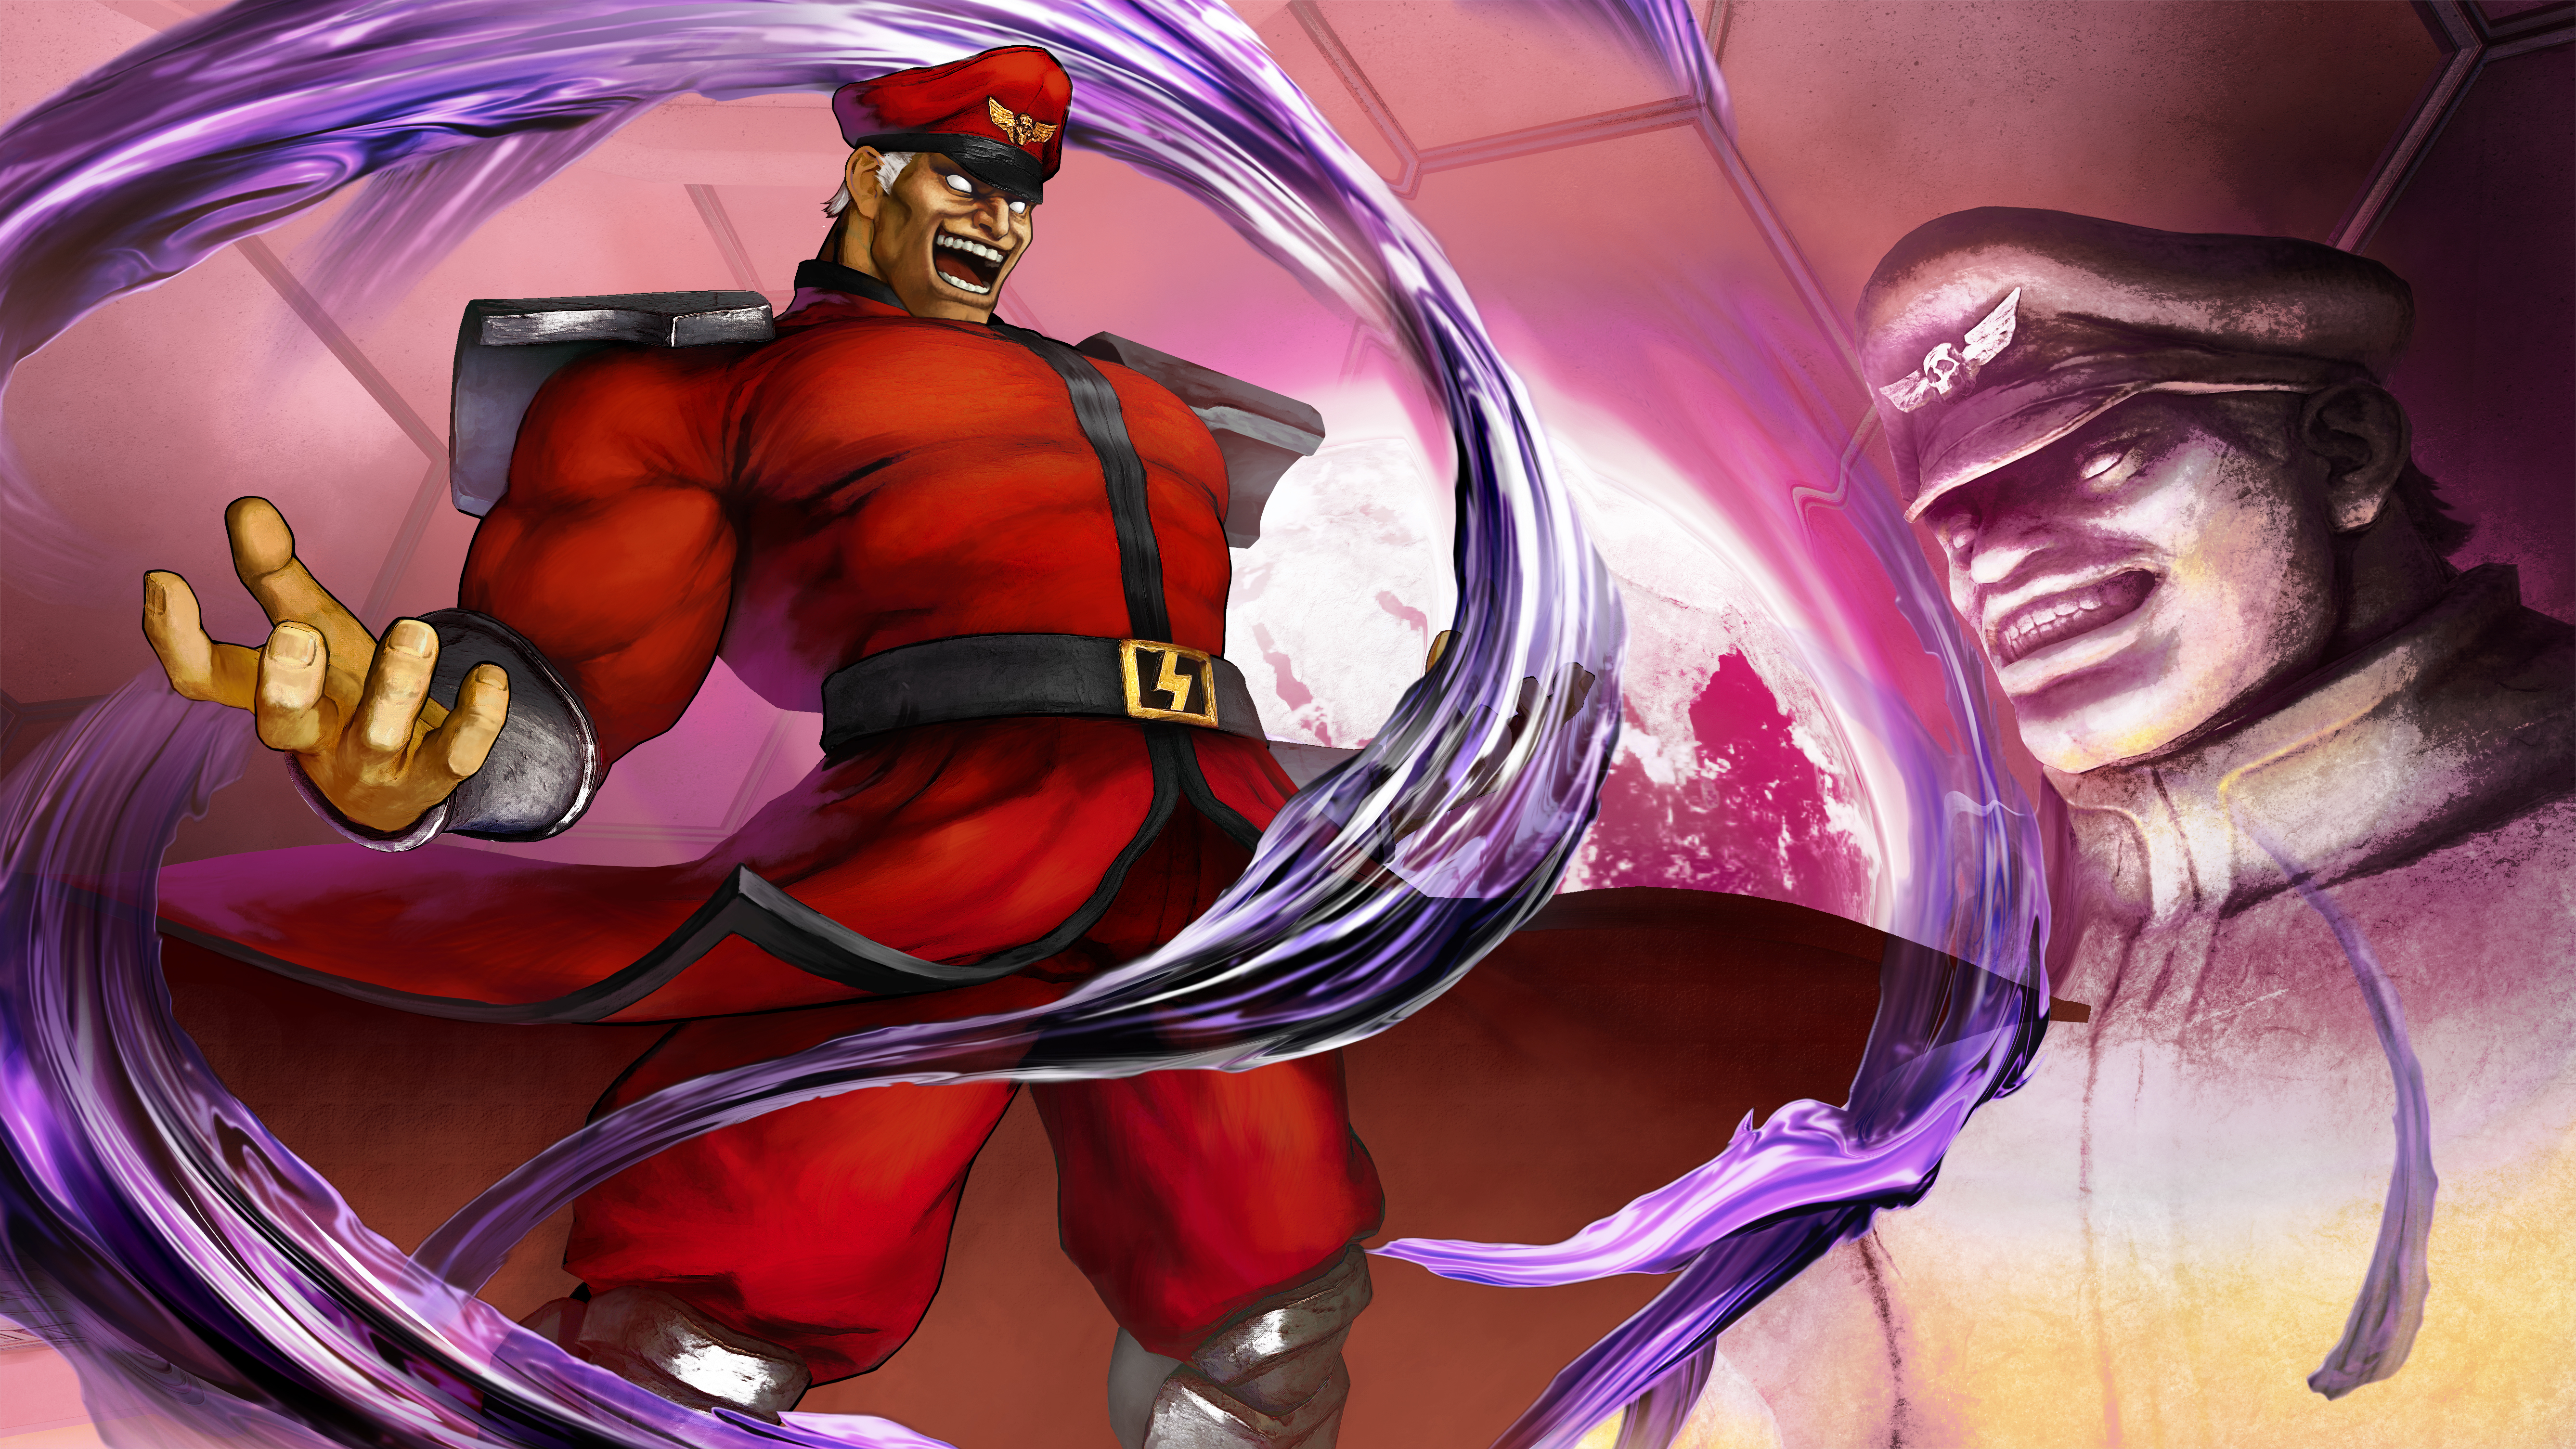 These Street Fighter 5 Wallpaper Will Make You 100% Cooler Than Everyone